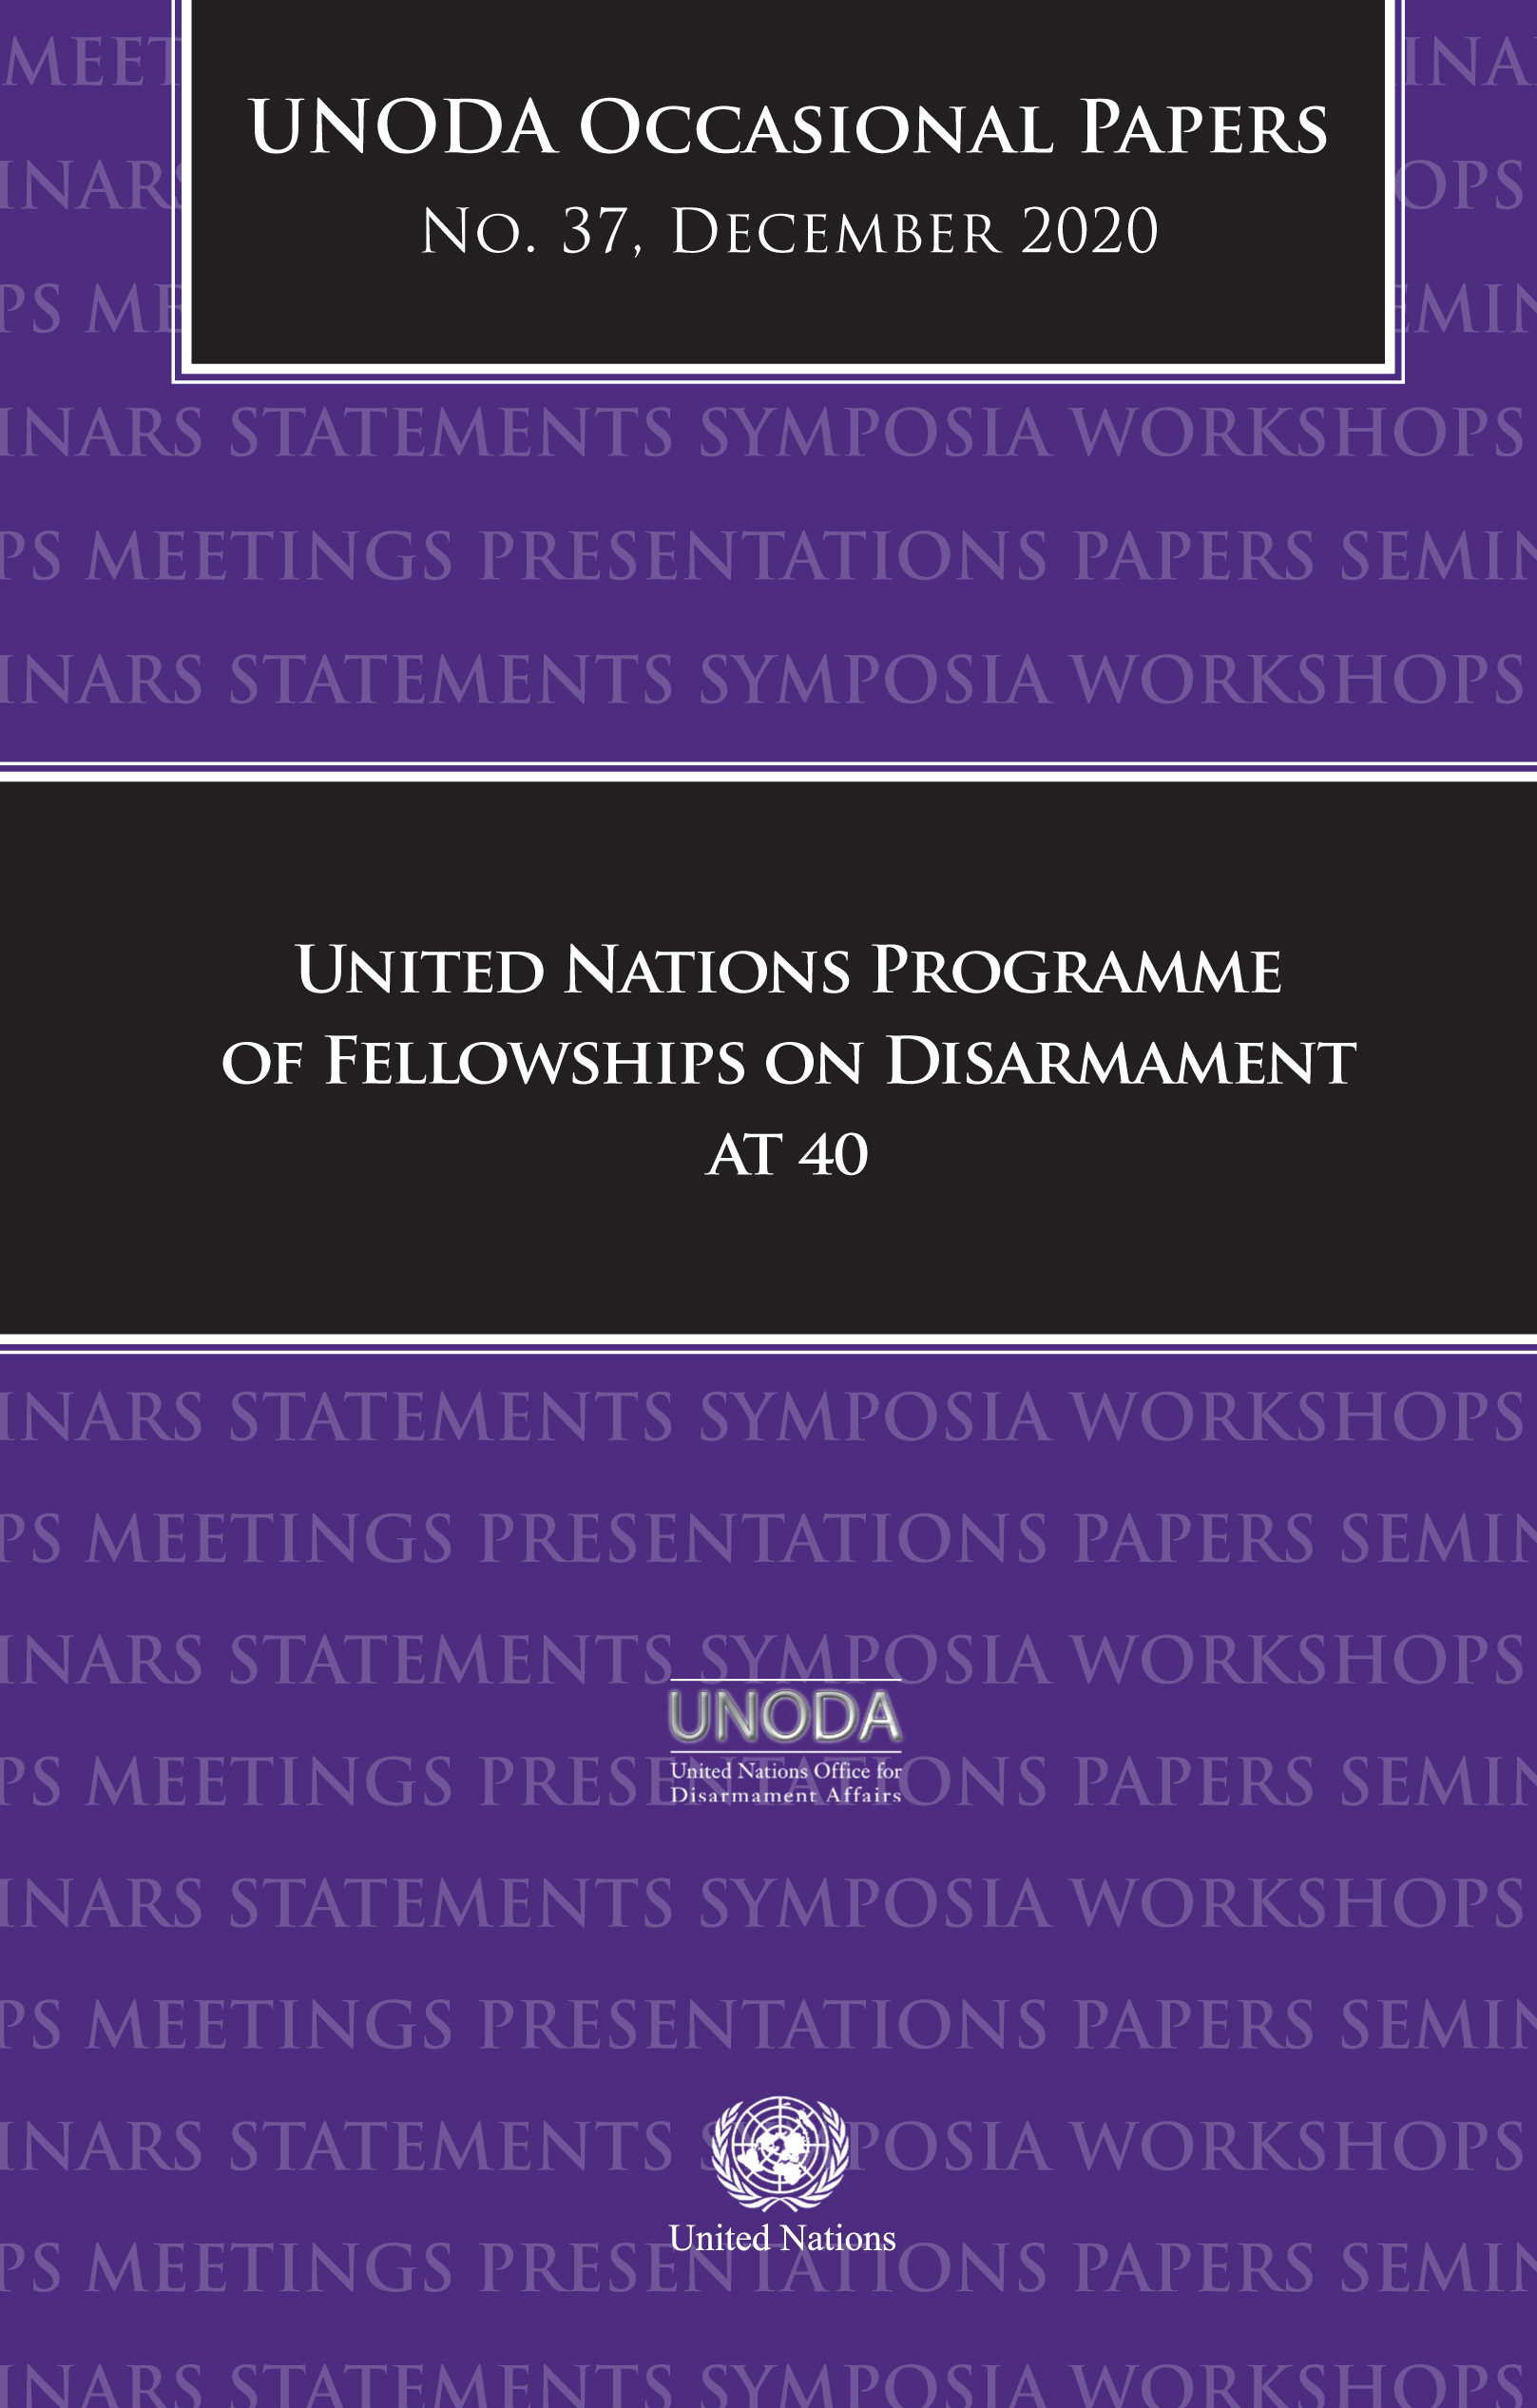 image of In commemoration of the fortieth anniversary of the United Nations Programme of Fellowships on Disarmament